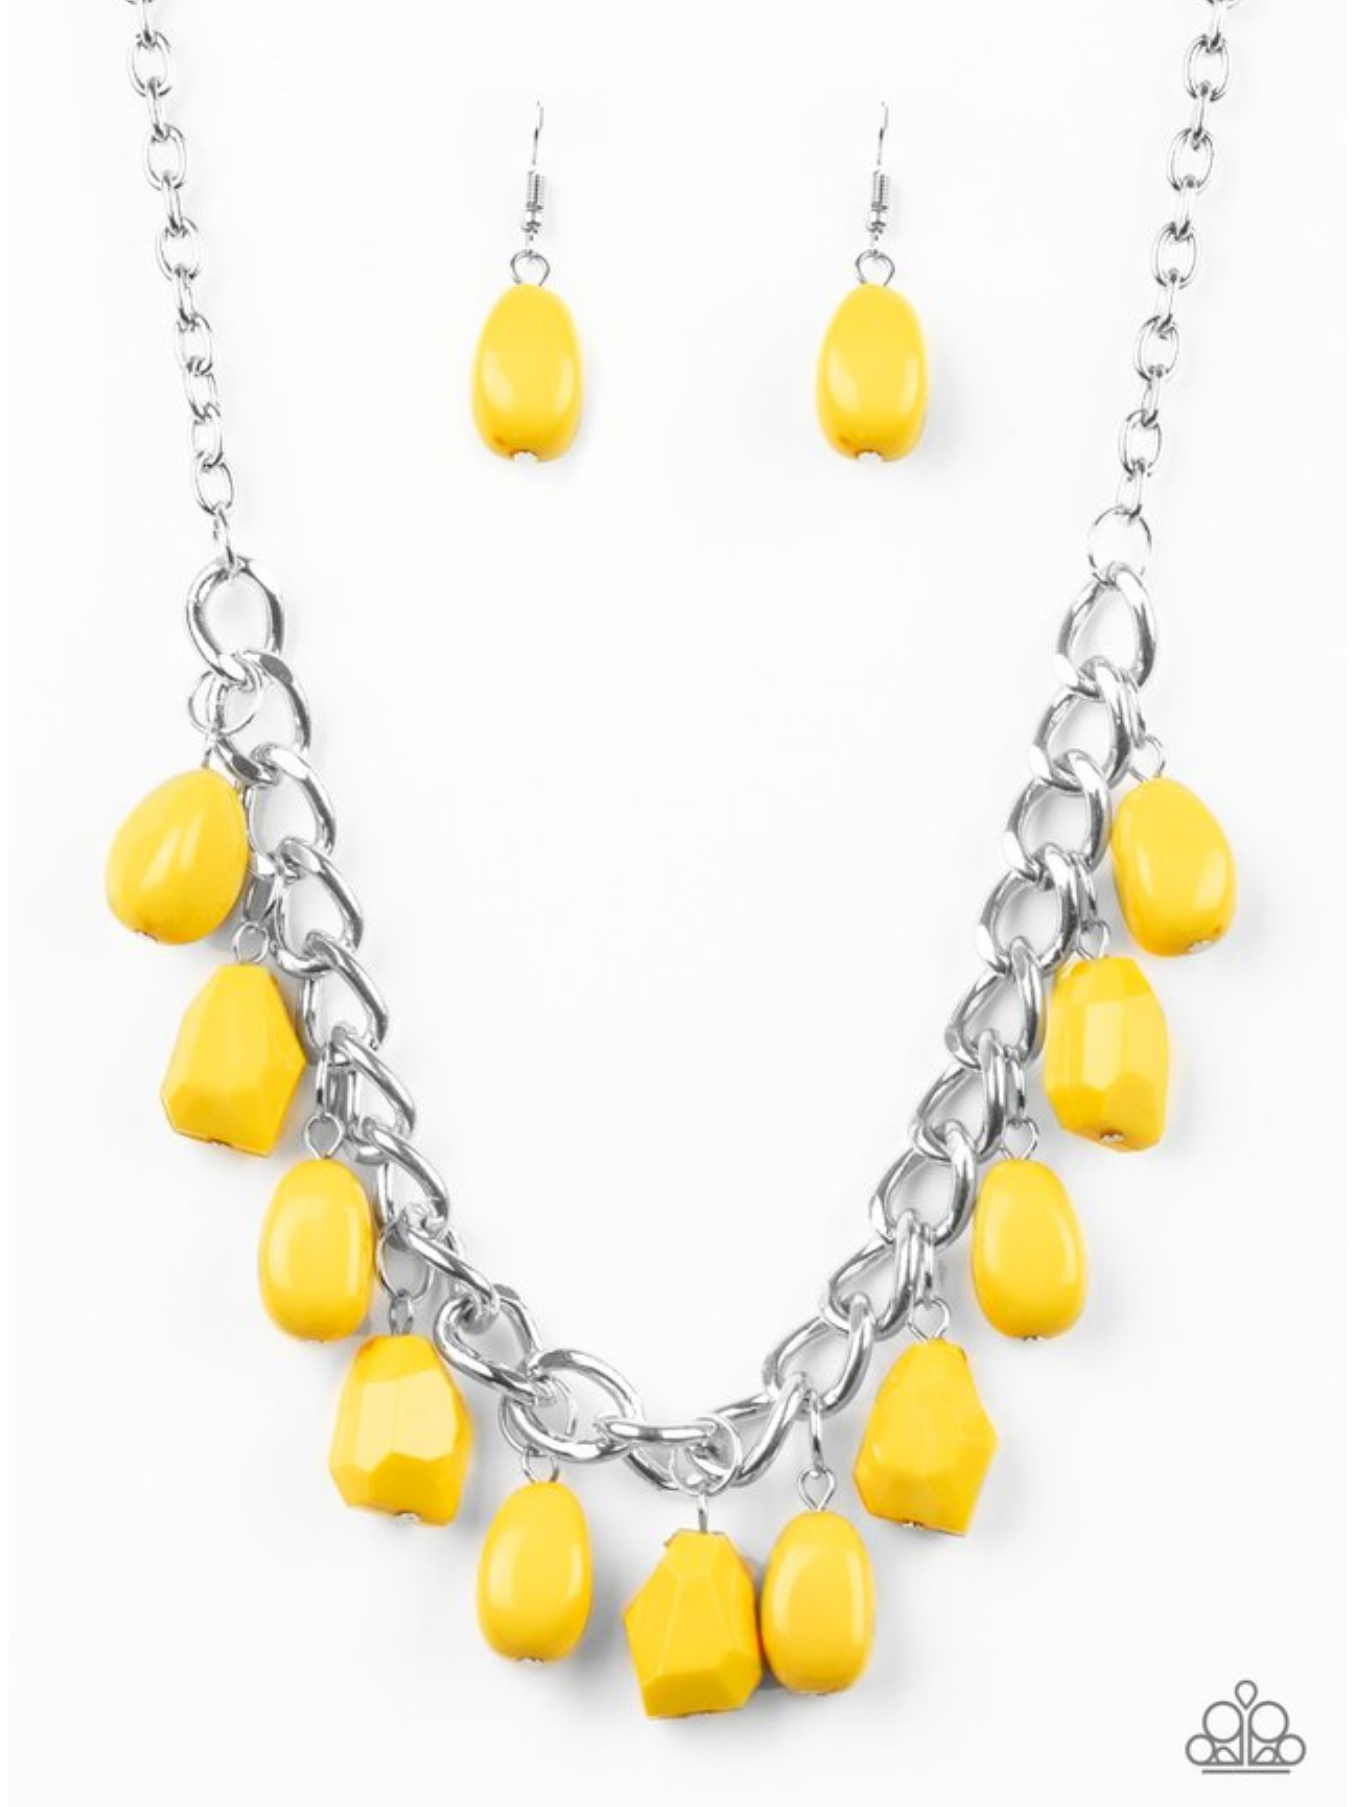 Take The COLOR Wheel! - Yellow - VJ Bedazzled Jewelry